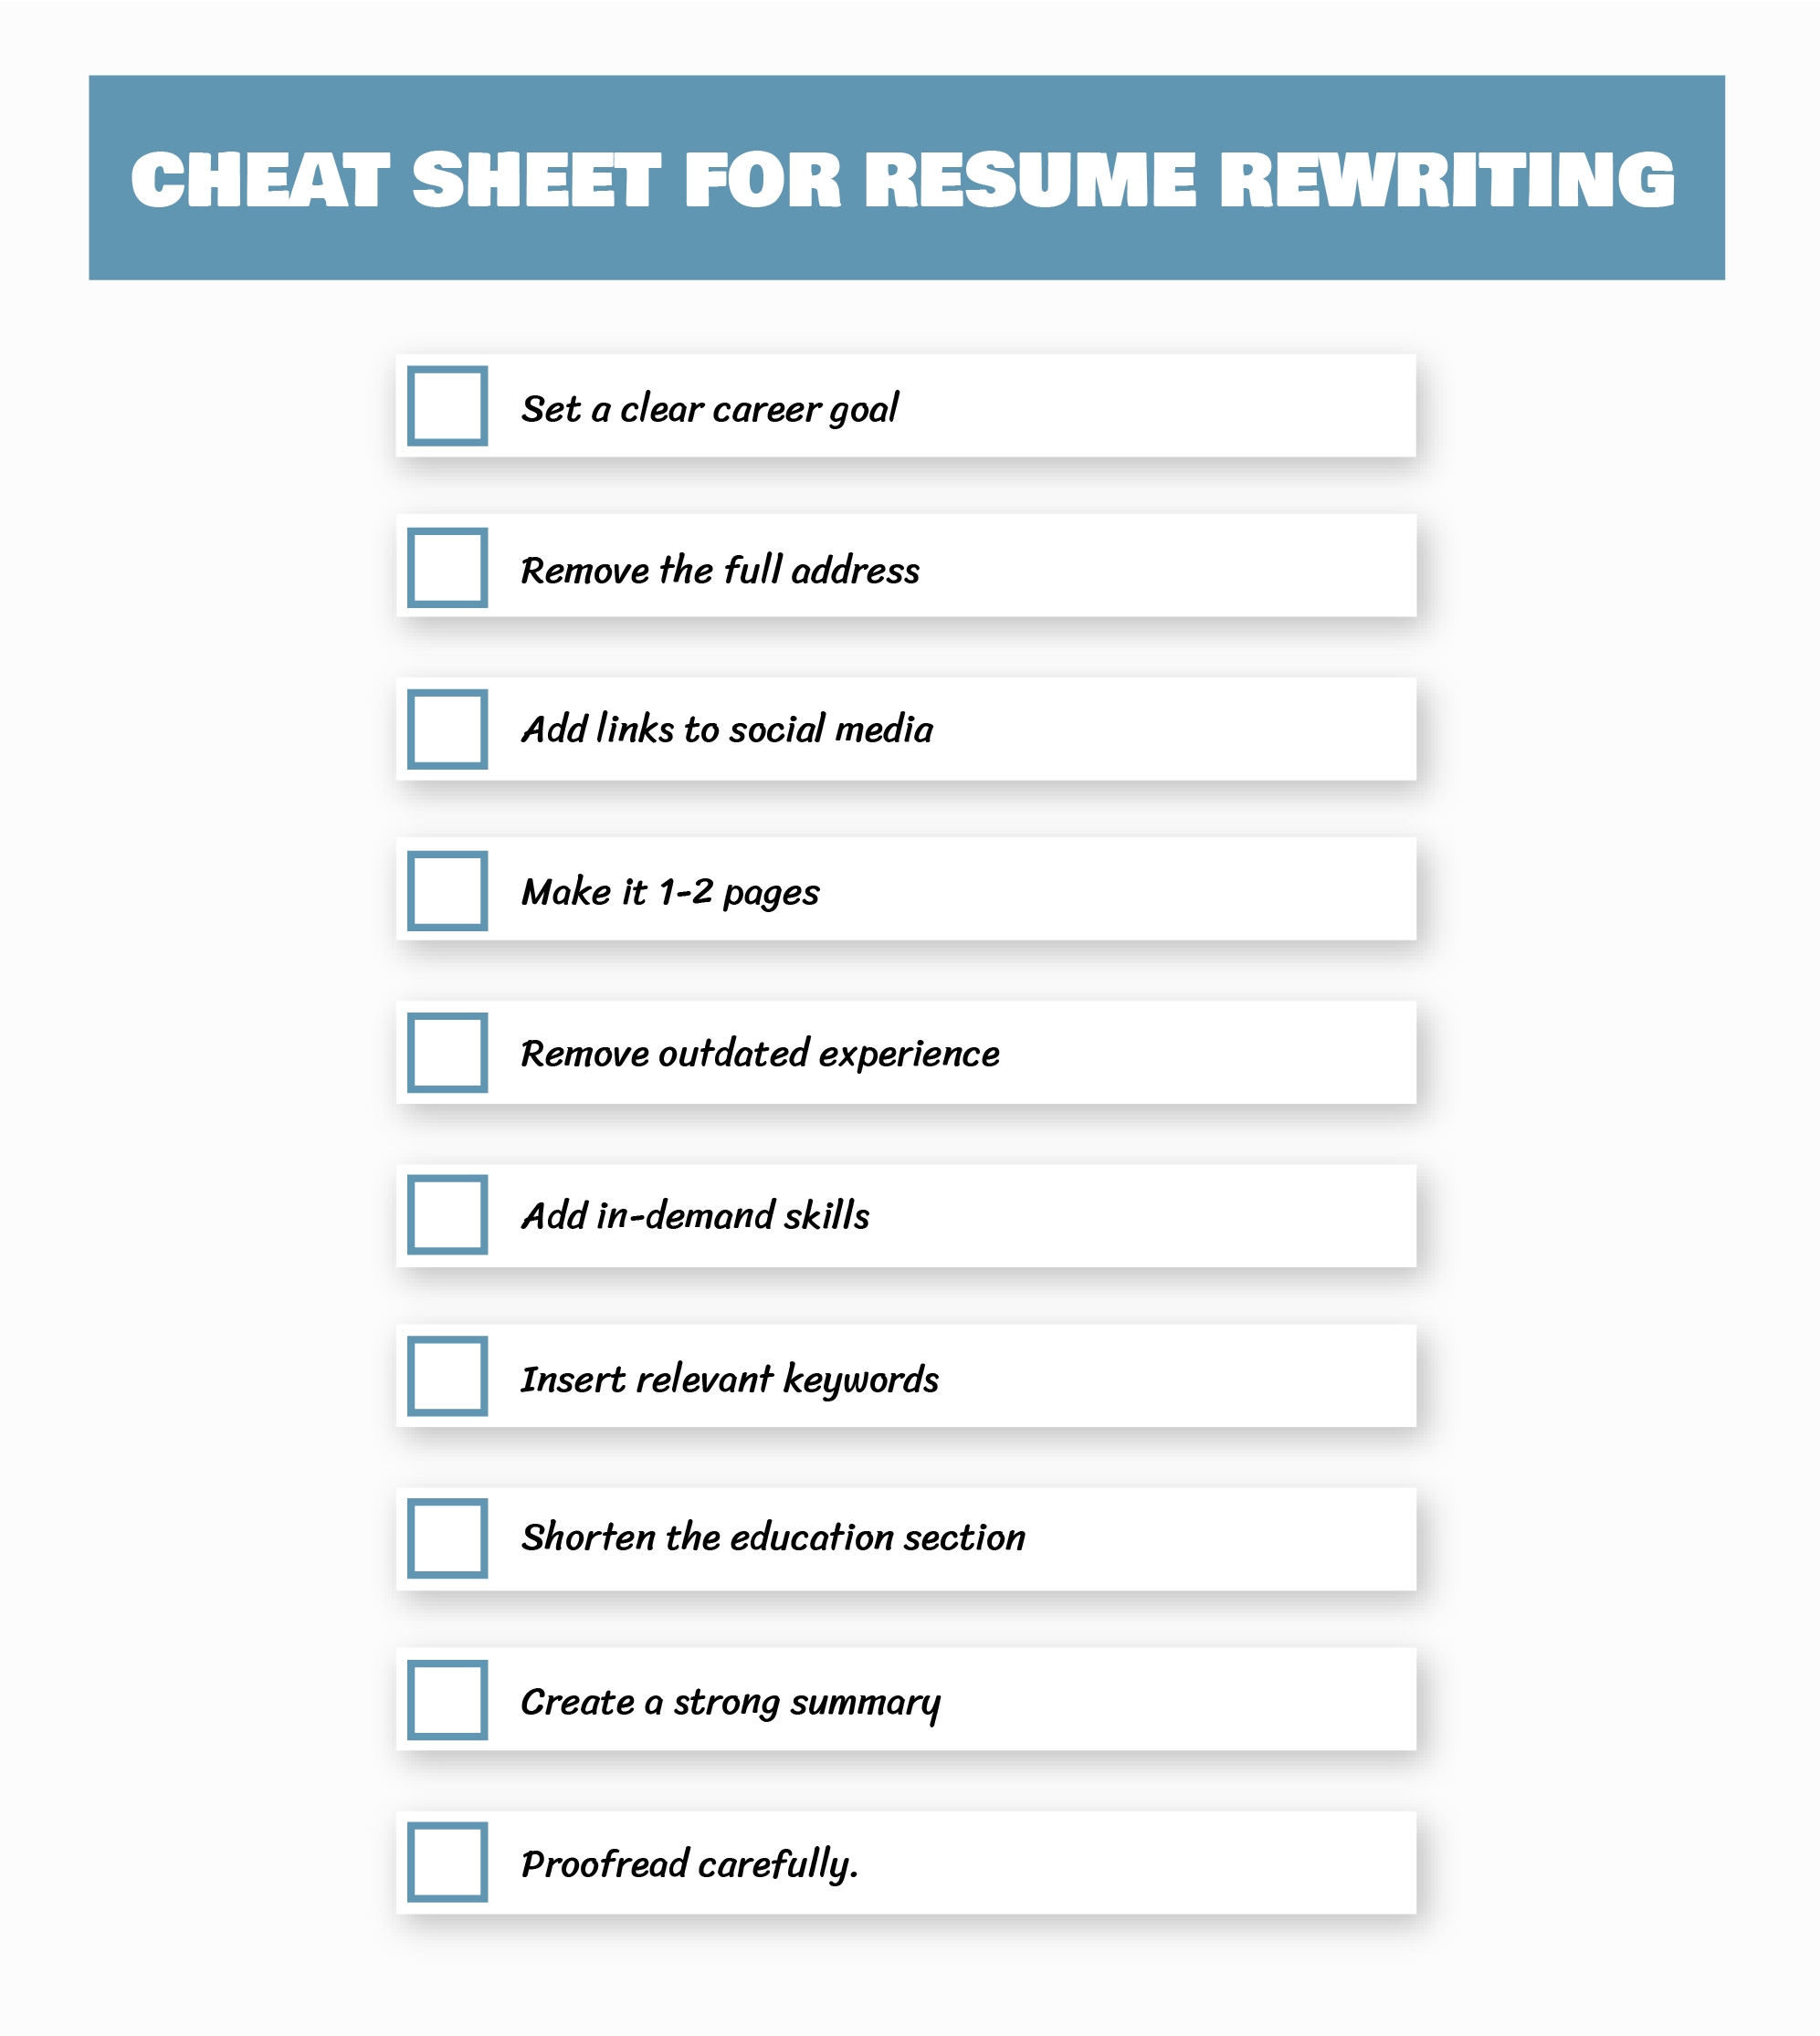 Cheat sheet for resume rewriting